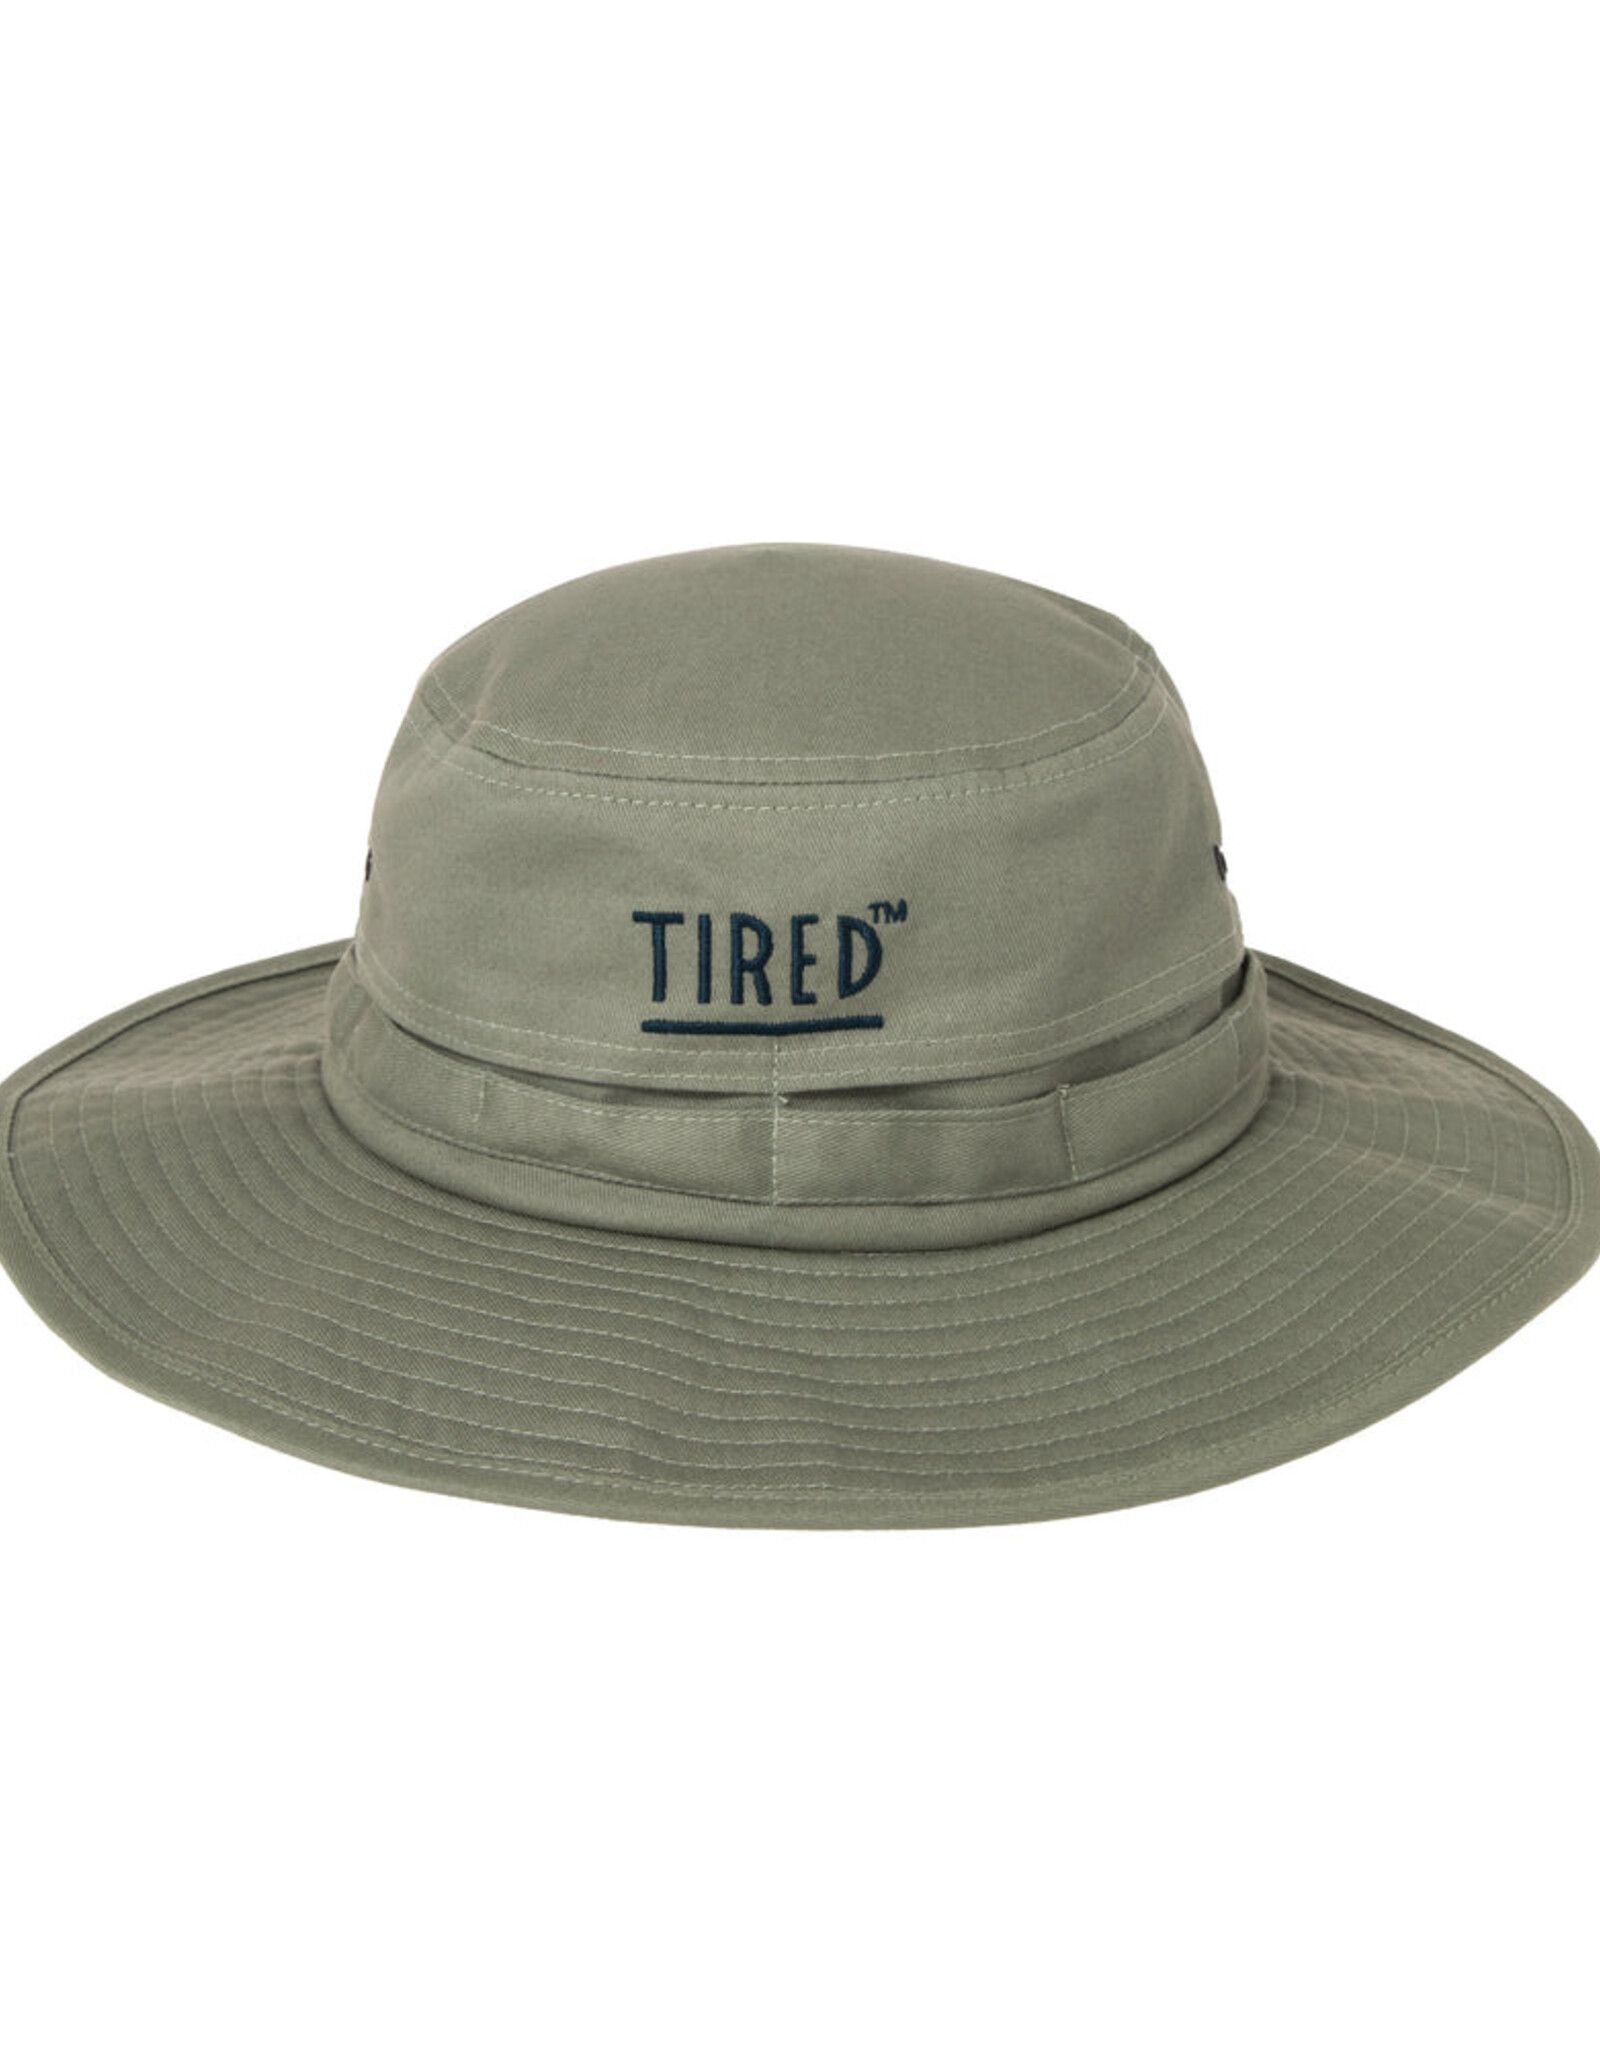 TIRED SKATEBOARDS TIRED OG FISHING HAT - DUSTY ARMY